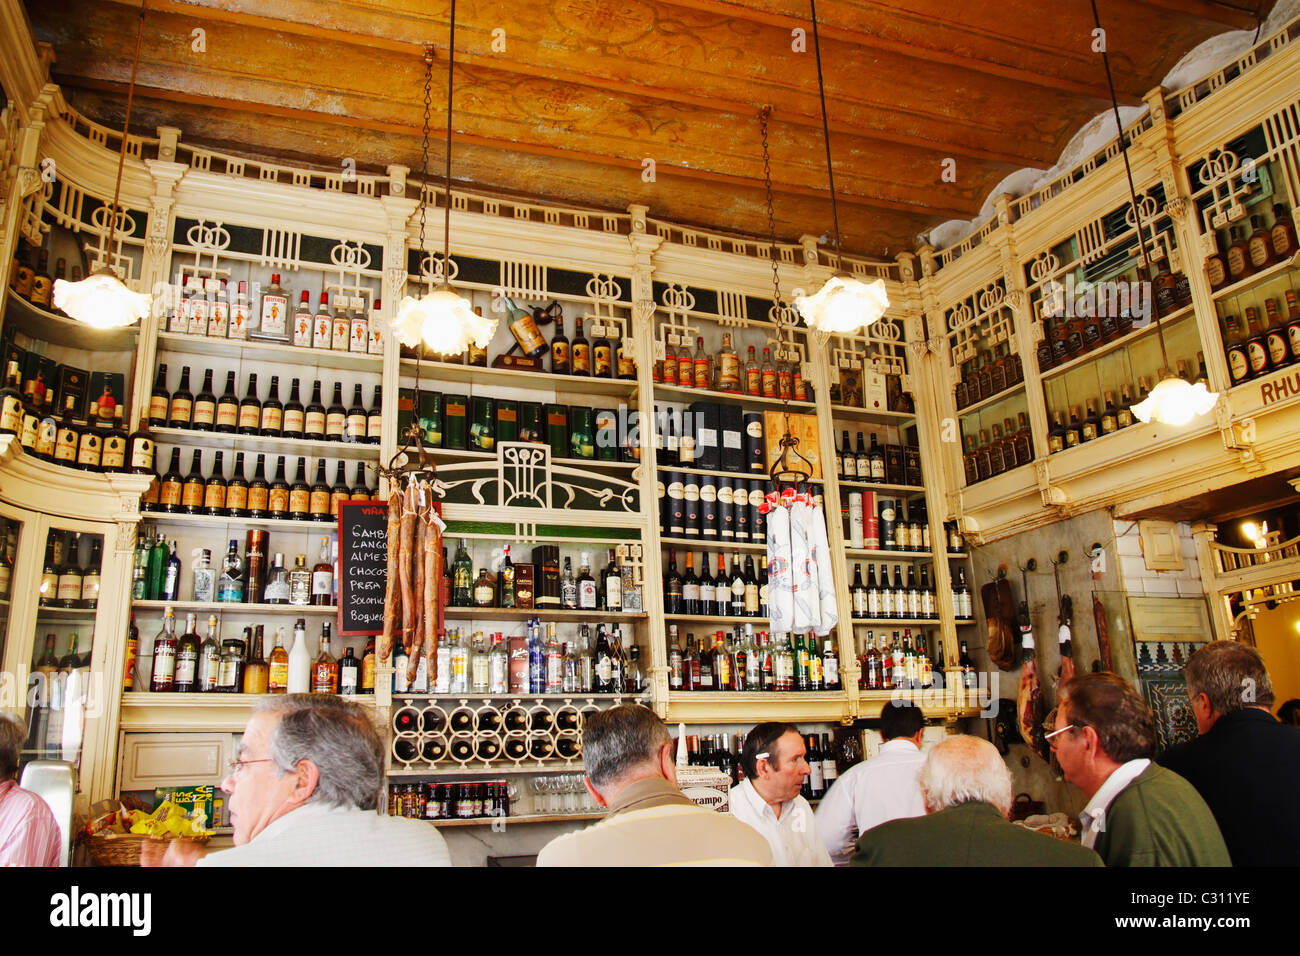 The famous El Rinconcillo Tapas bar in Seville. Said to be the oldest Tapas bar in the city. Seville, Andalusia, Spain Stock Photo